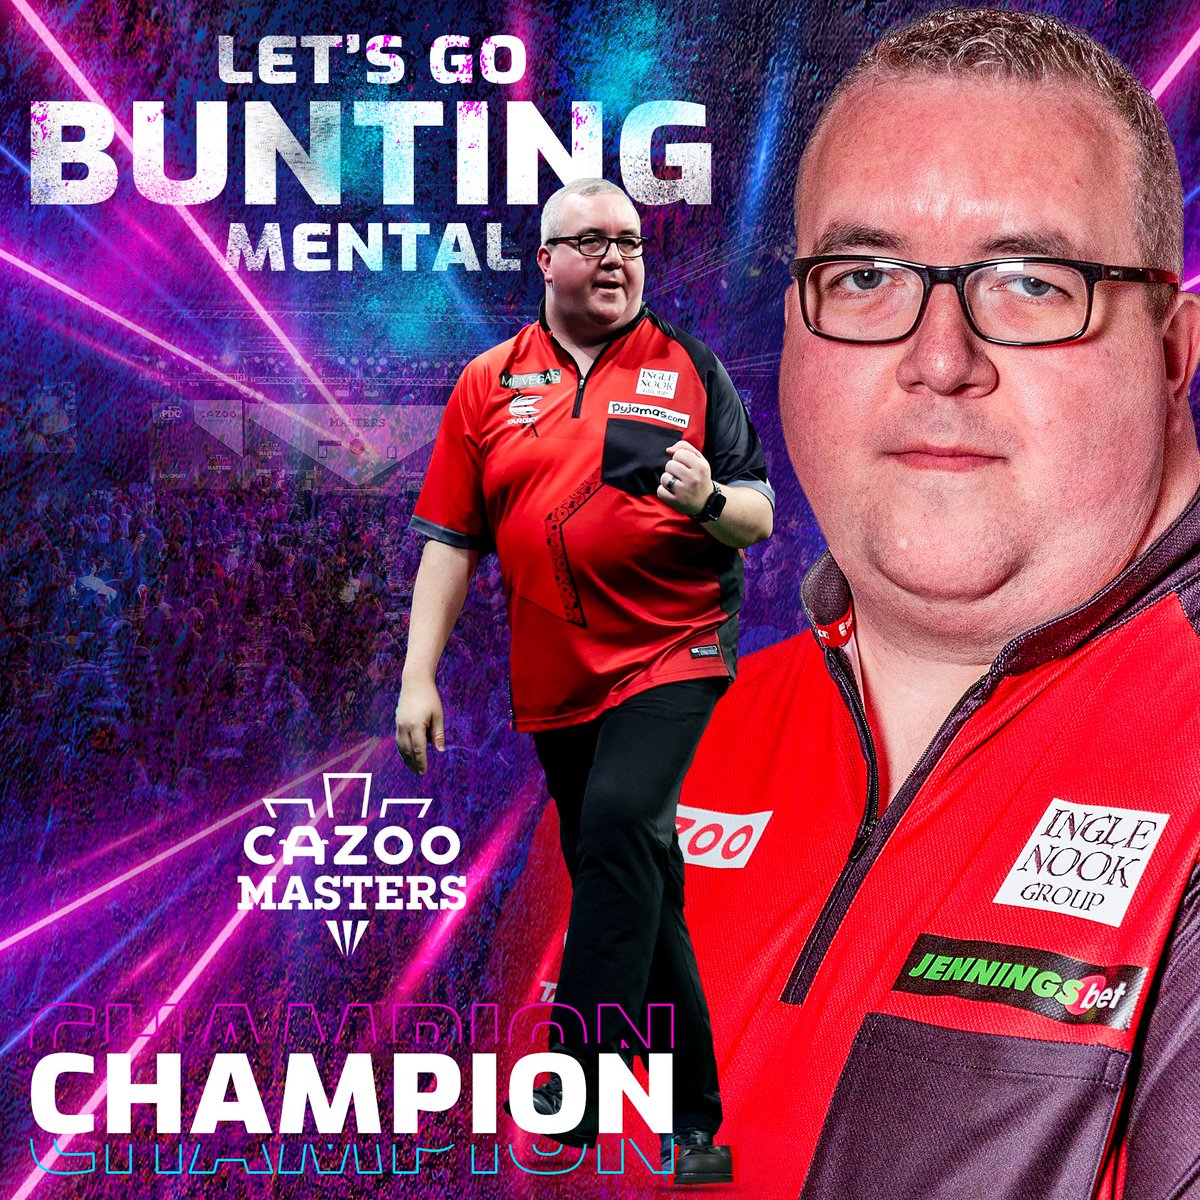 STEPHEN BUNTING HAS DONE IT!!! 🏆 He is the 2024 Cazoo Masters Champion 🙌 #BuntingMental